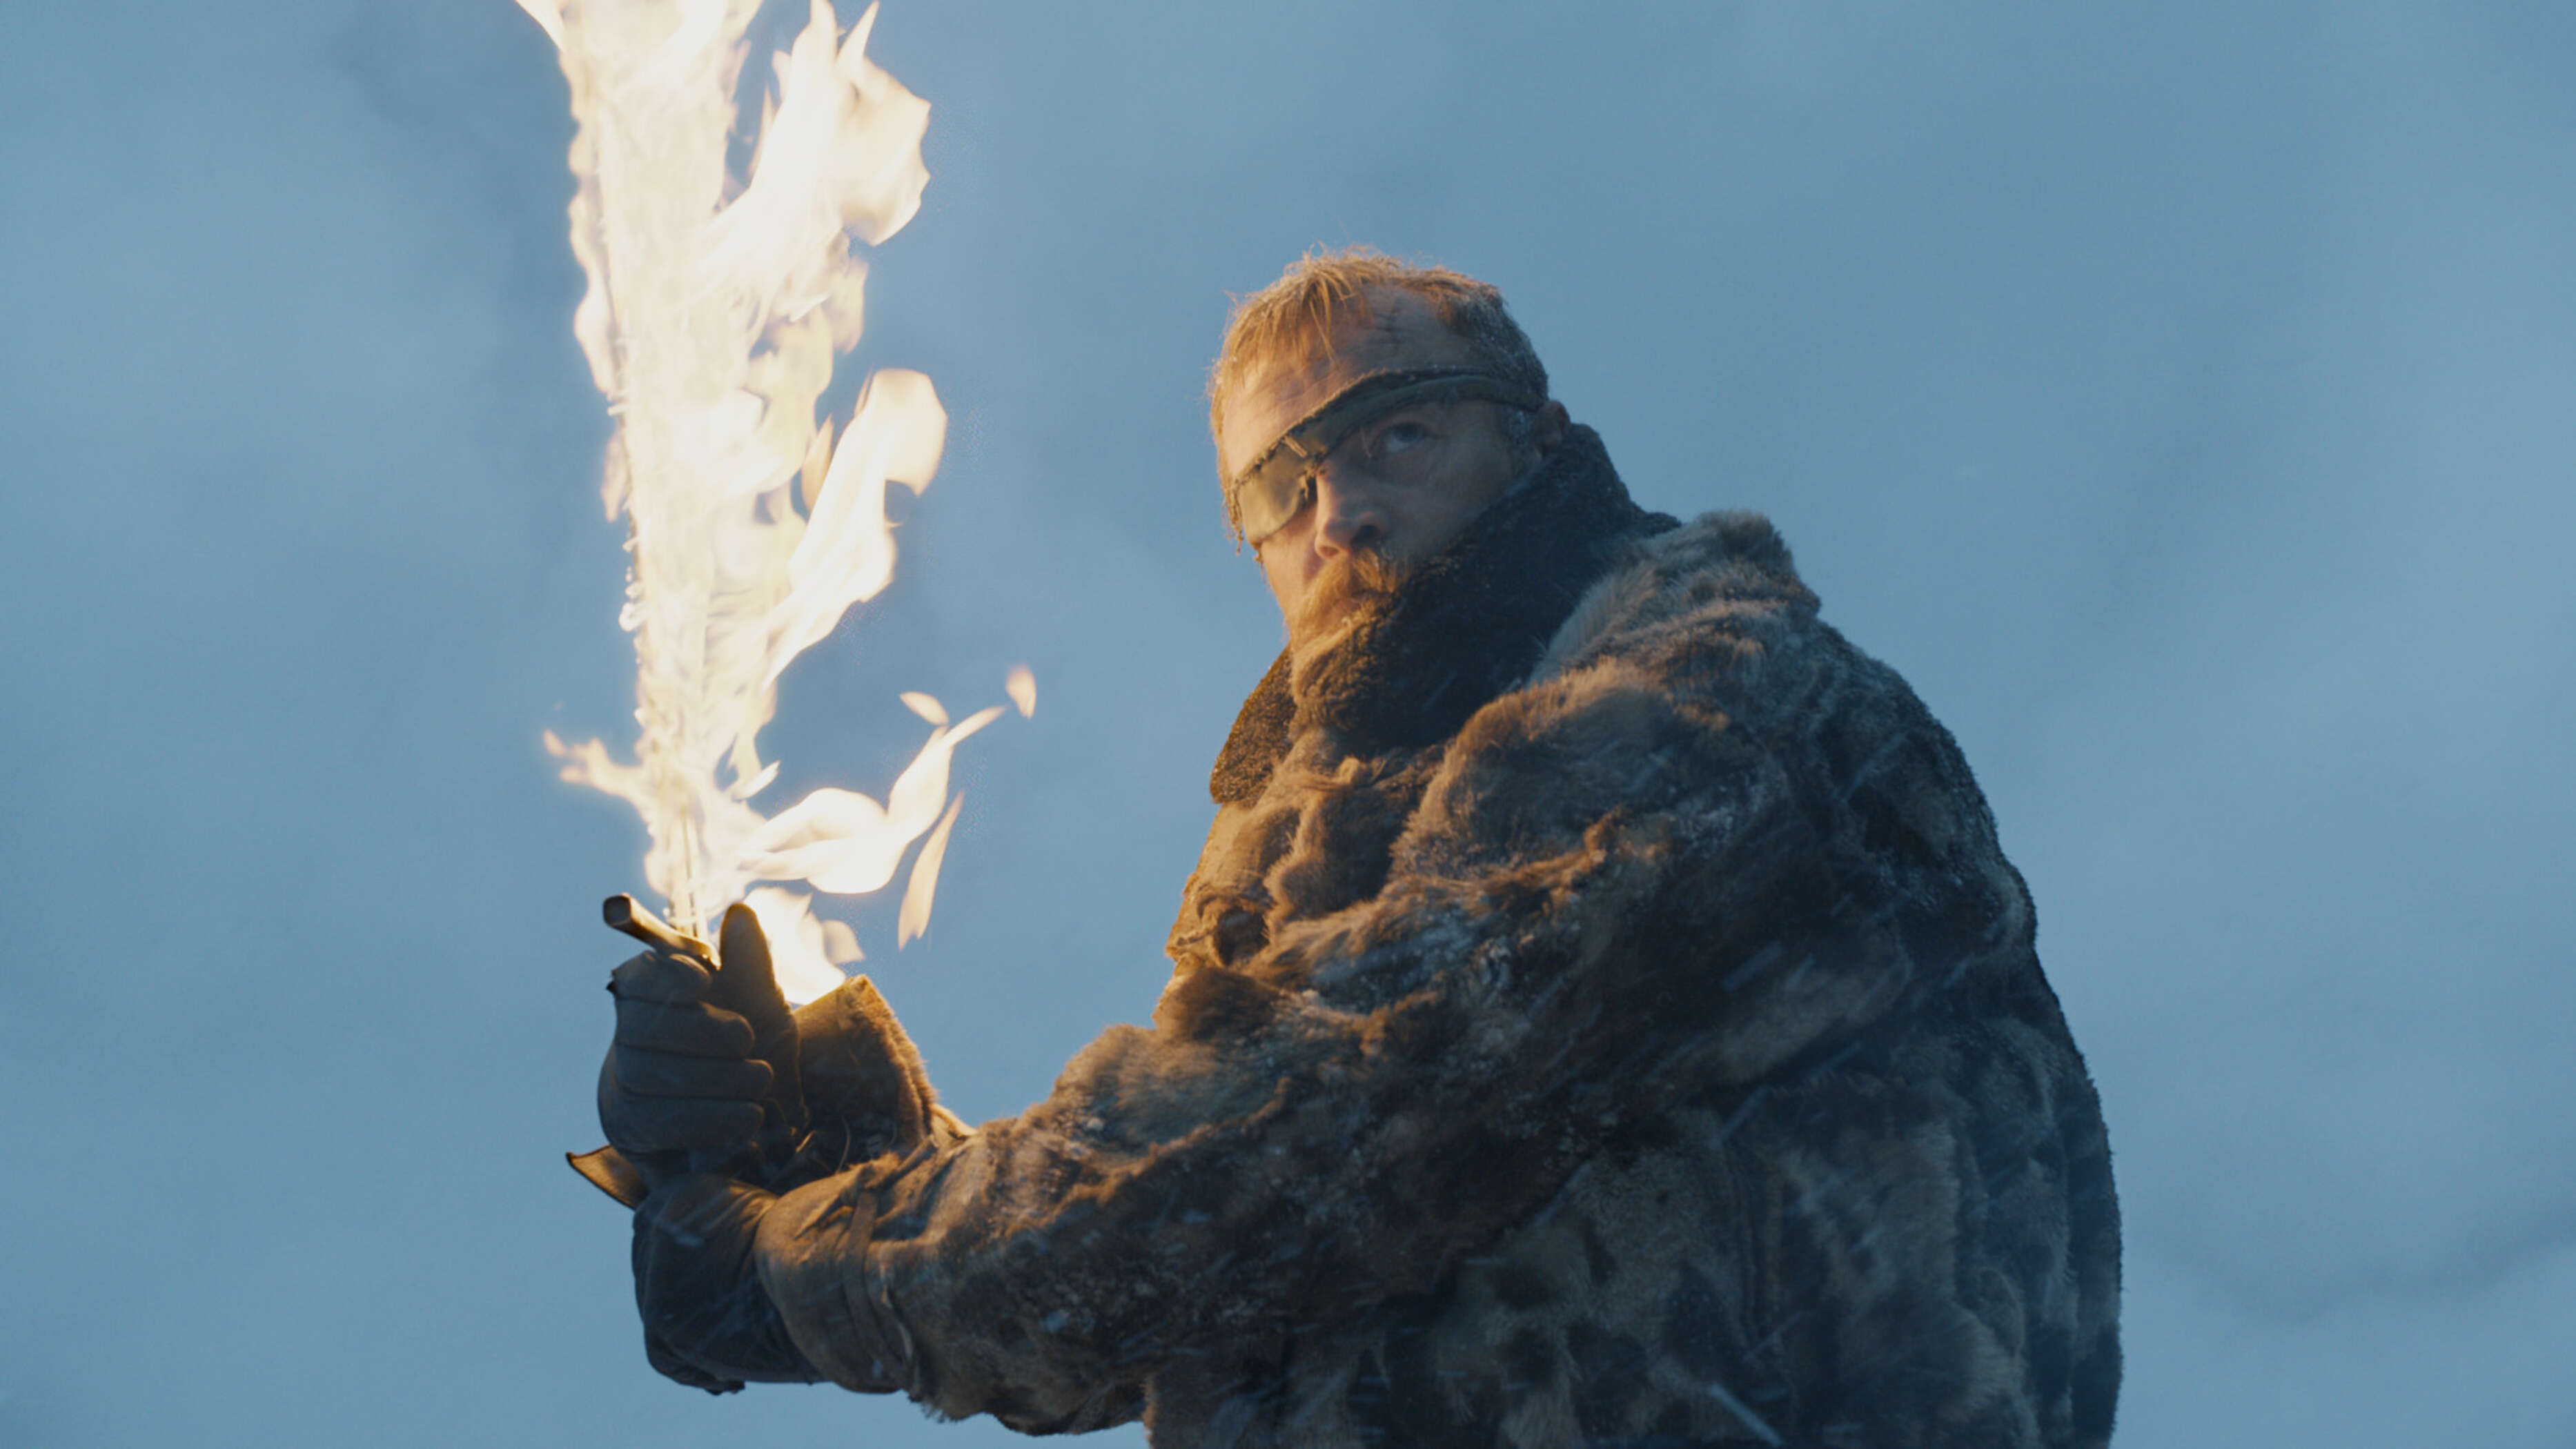 beric fire sword game of thrones season 7 beyond the wall